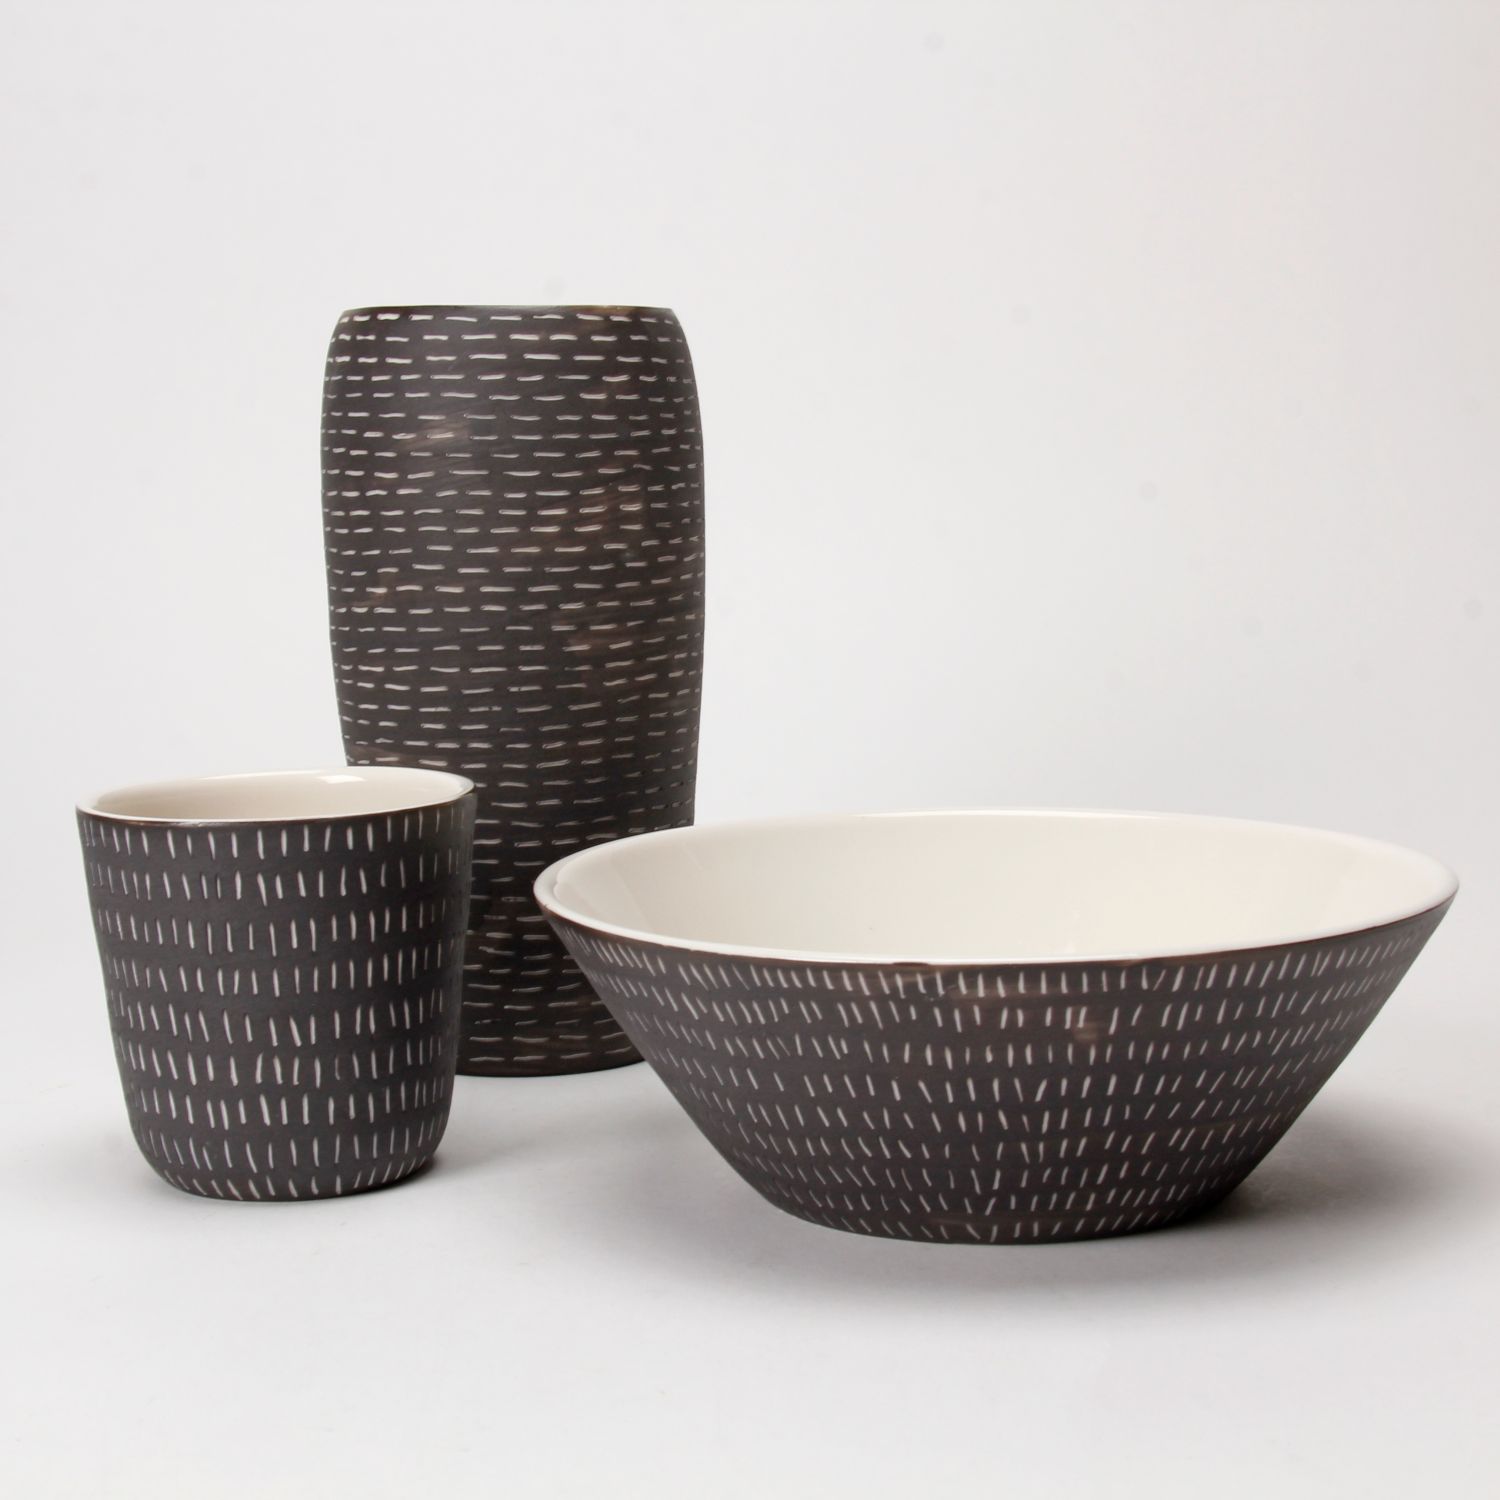 Cuir Ceramics: Black and White Bowl Product Image 2 of 5